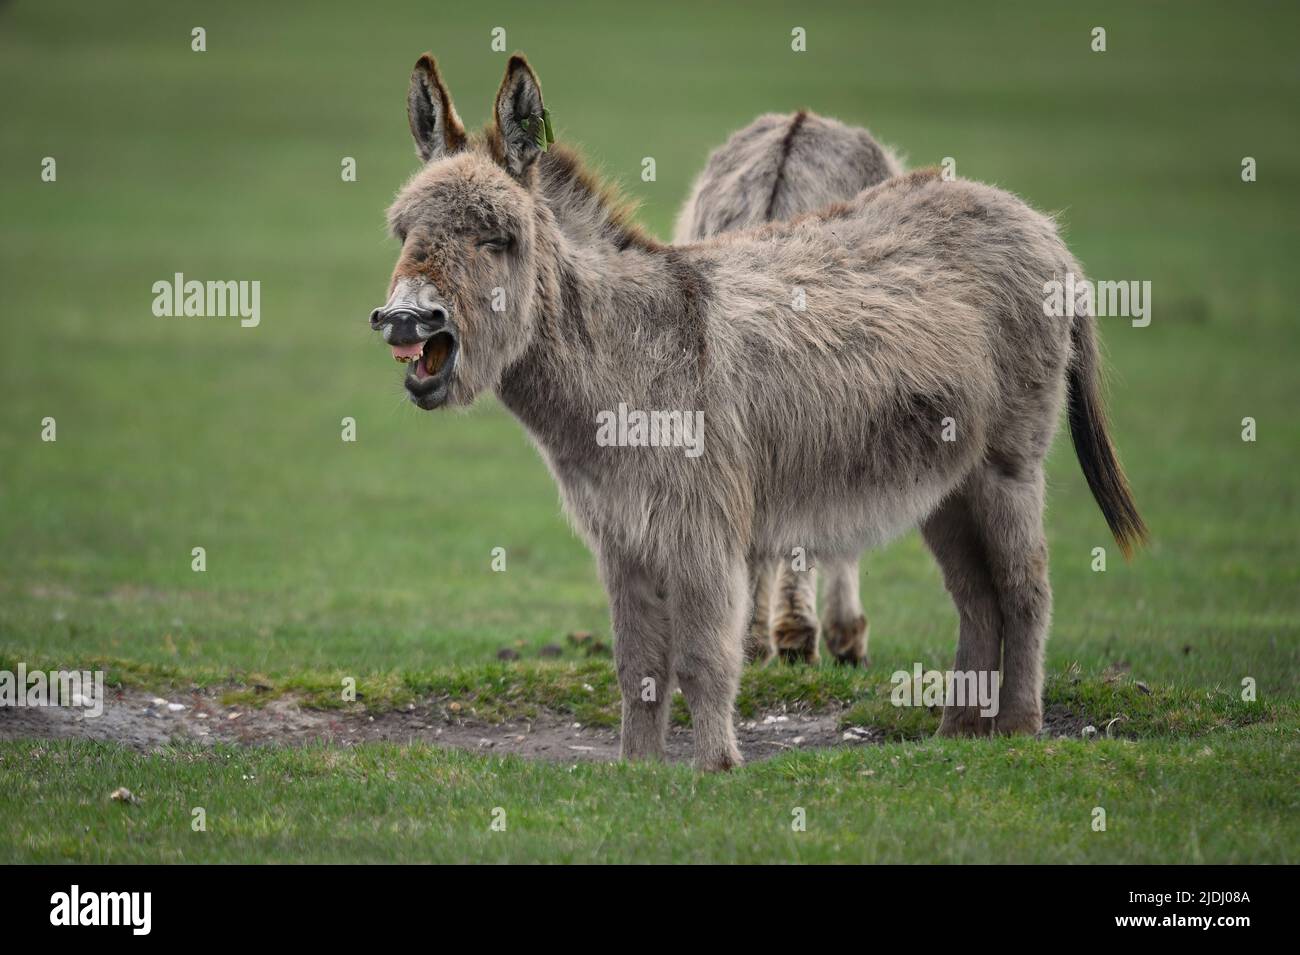 Two New Forest donkeys together with one with mouth open looking like its nagging the other. Amusing image. ( image set) Stock Photo